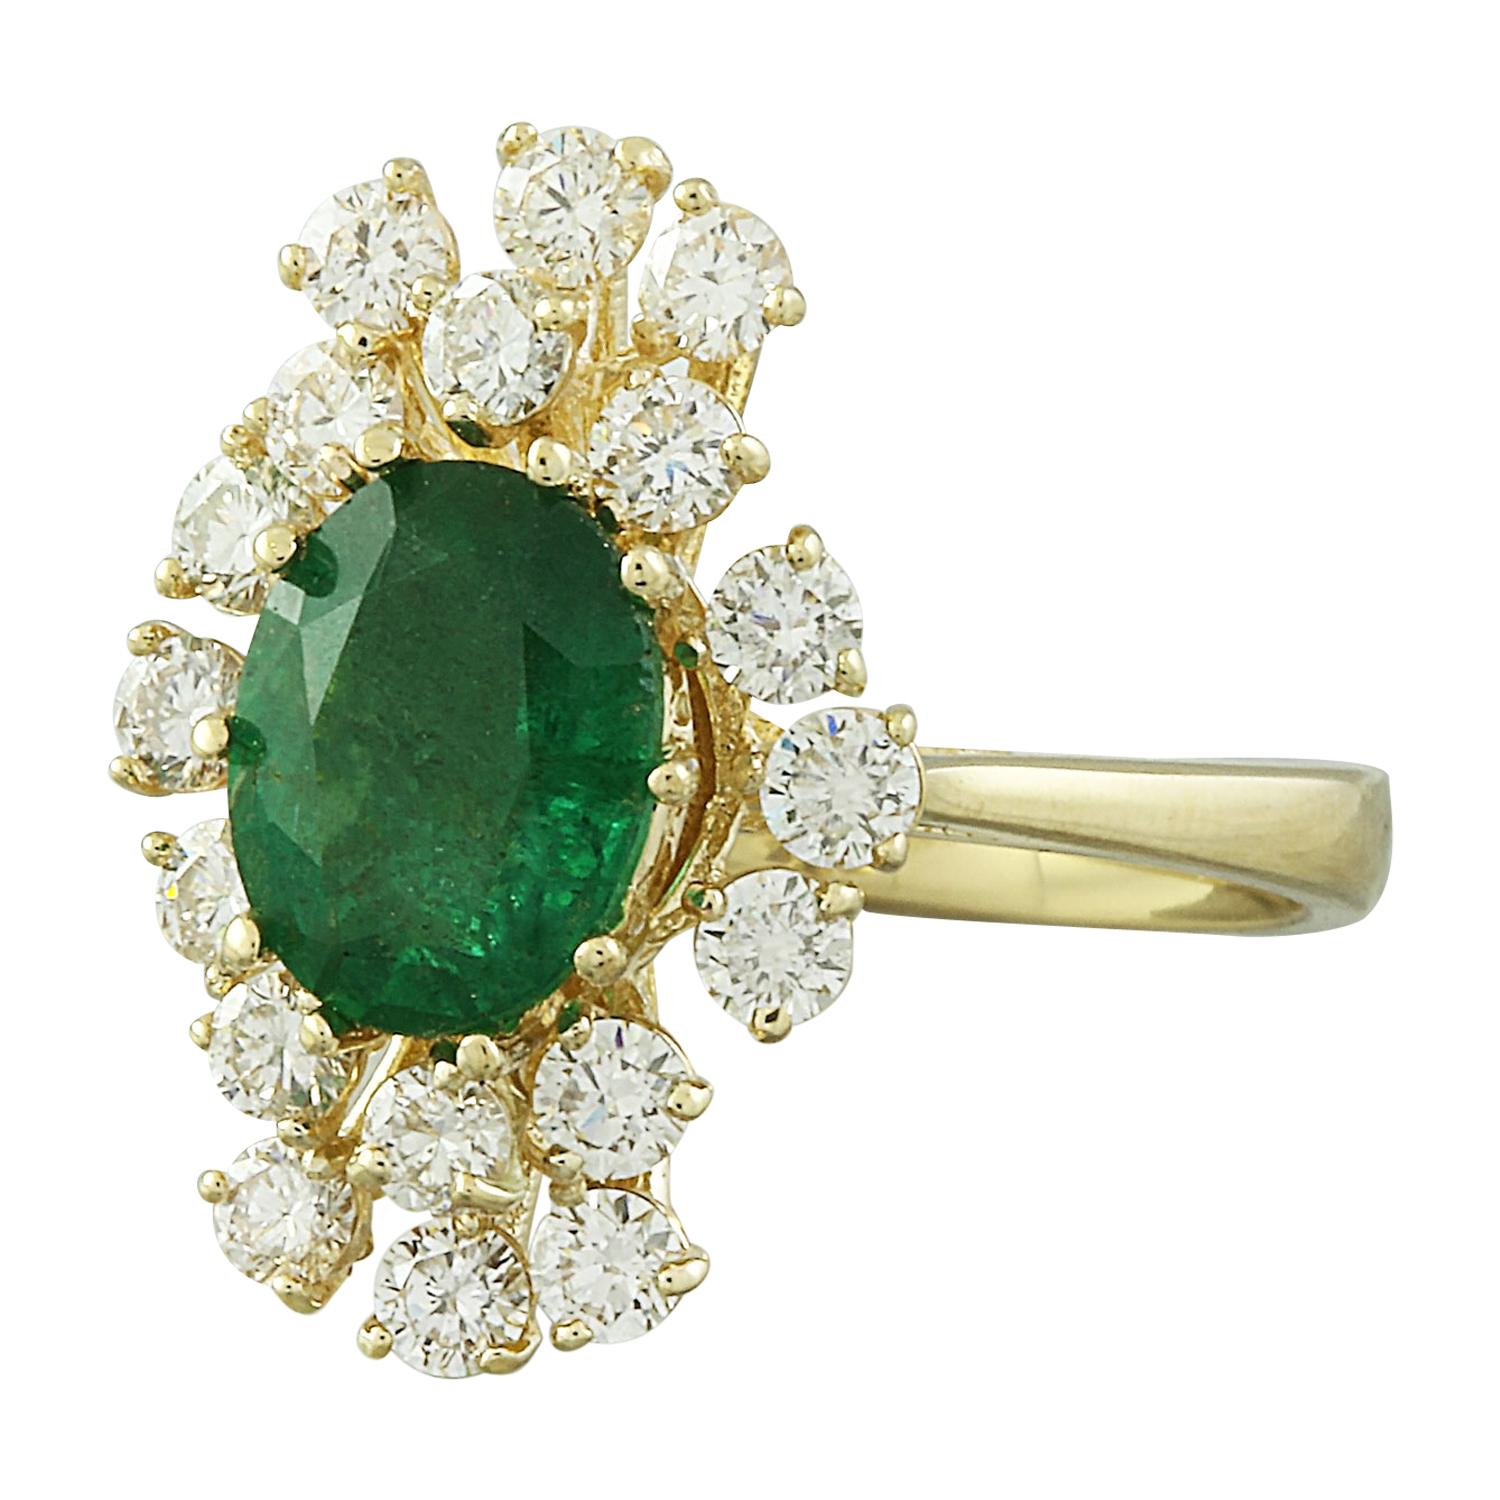 Indulge in elegance with our 2.80 Carat Natural Emerald 14K Solid Yellow Gold Diamond Ring. Stamped with 14K for authenticity, this exquisite piece weighs 5.8 grams in total. The centerpiece is a stunning natural emerald, weighing 1.80 carats and